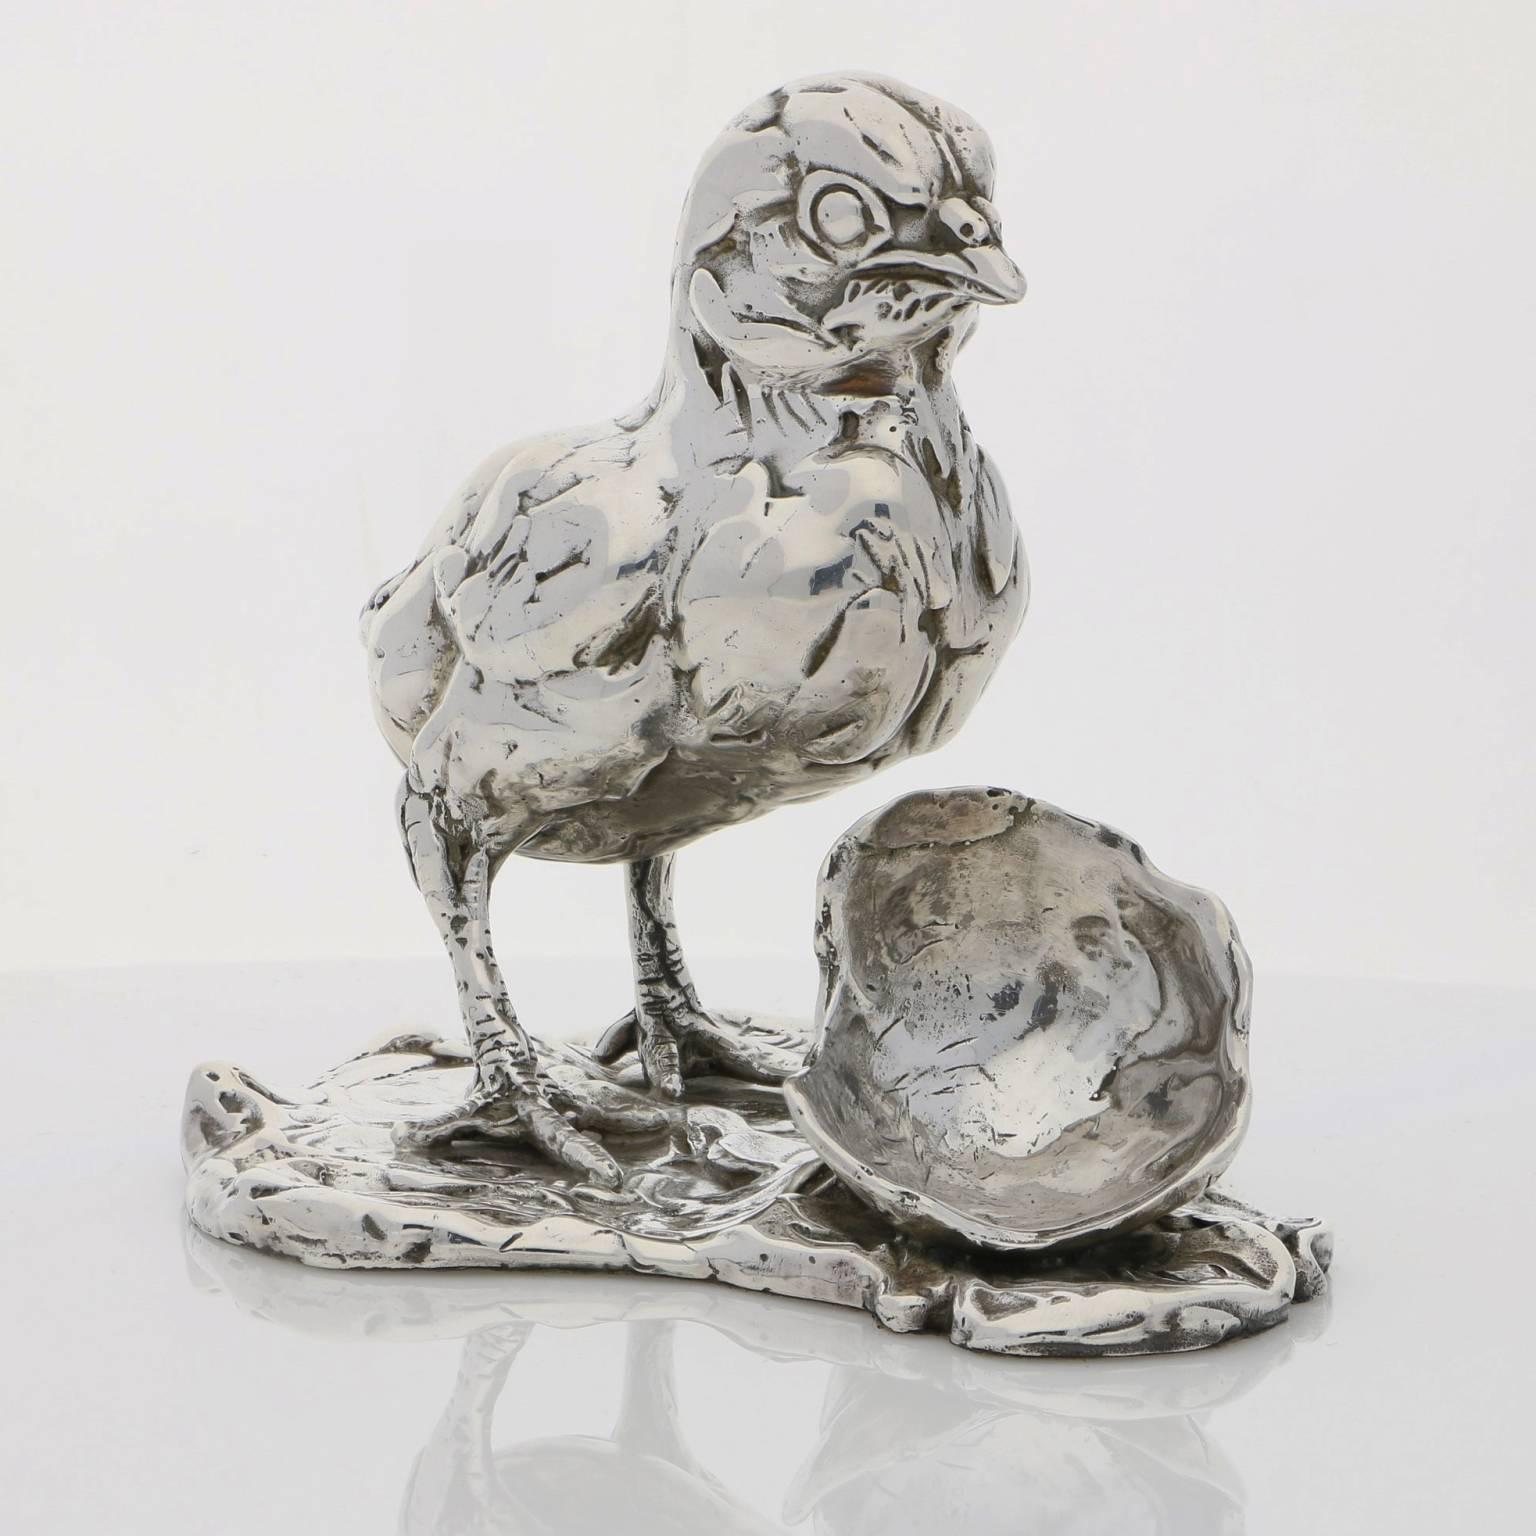  Lucy Kinsella 'Chicken & Egg' Sterling Silver Sculpture 2